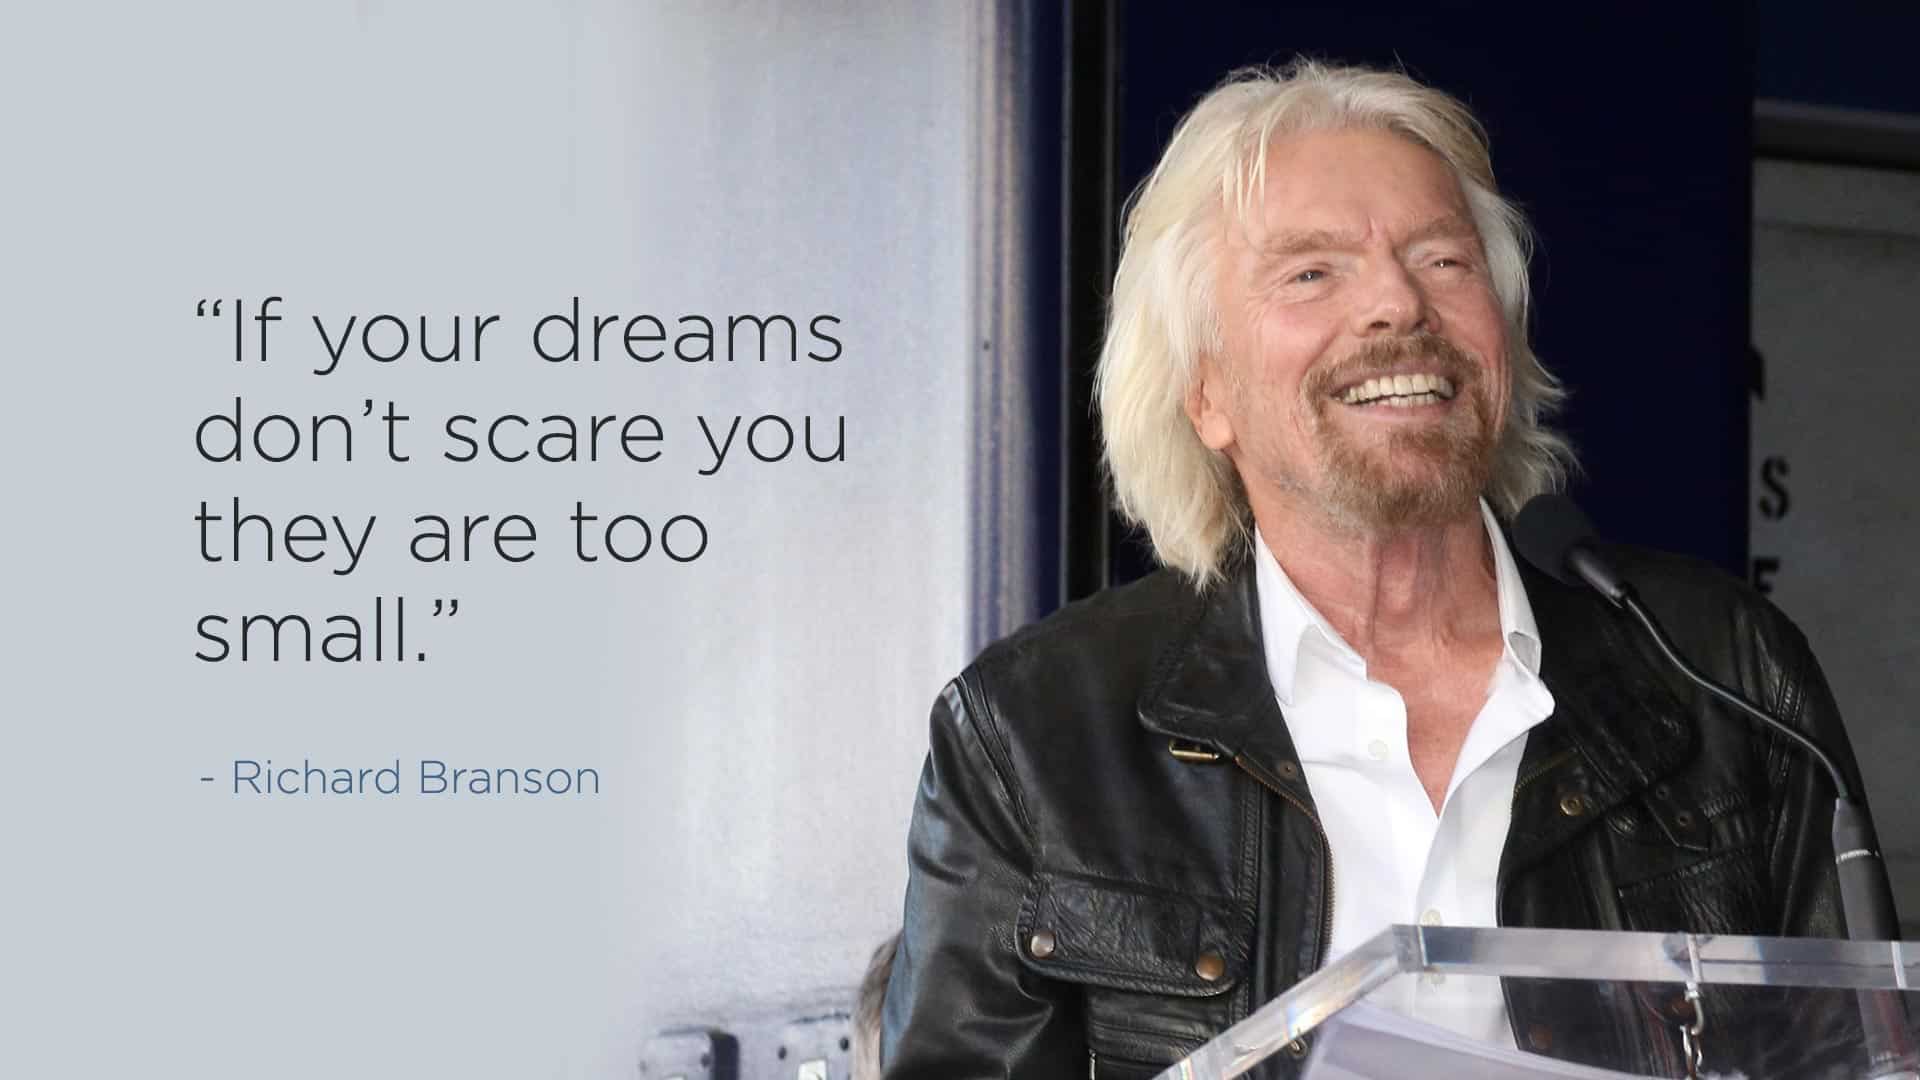 Richard branson quote about risk taking